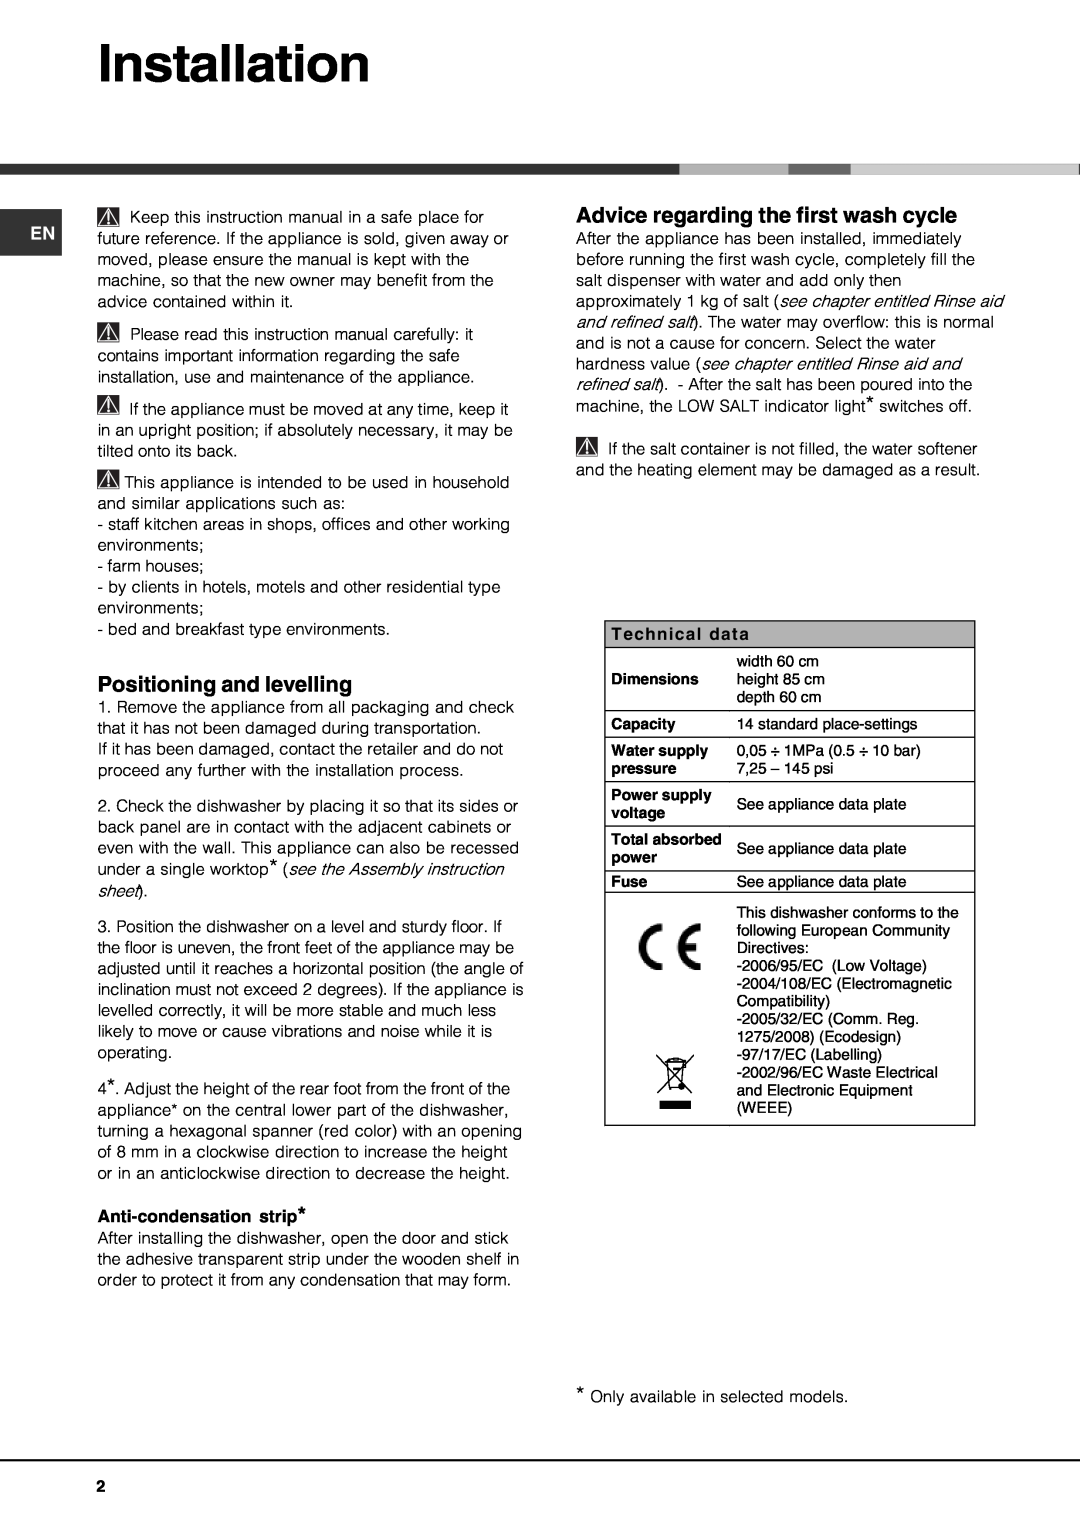 Hotpoint 1509)50-4 manual Installation, Positioning and levelling, Advice regarding the first wash cycle, Technical data 